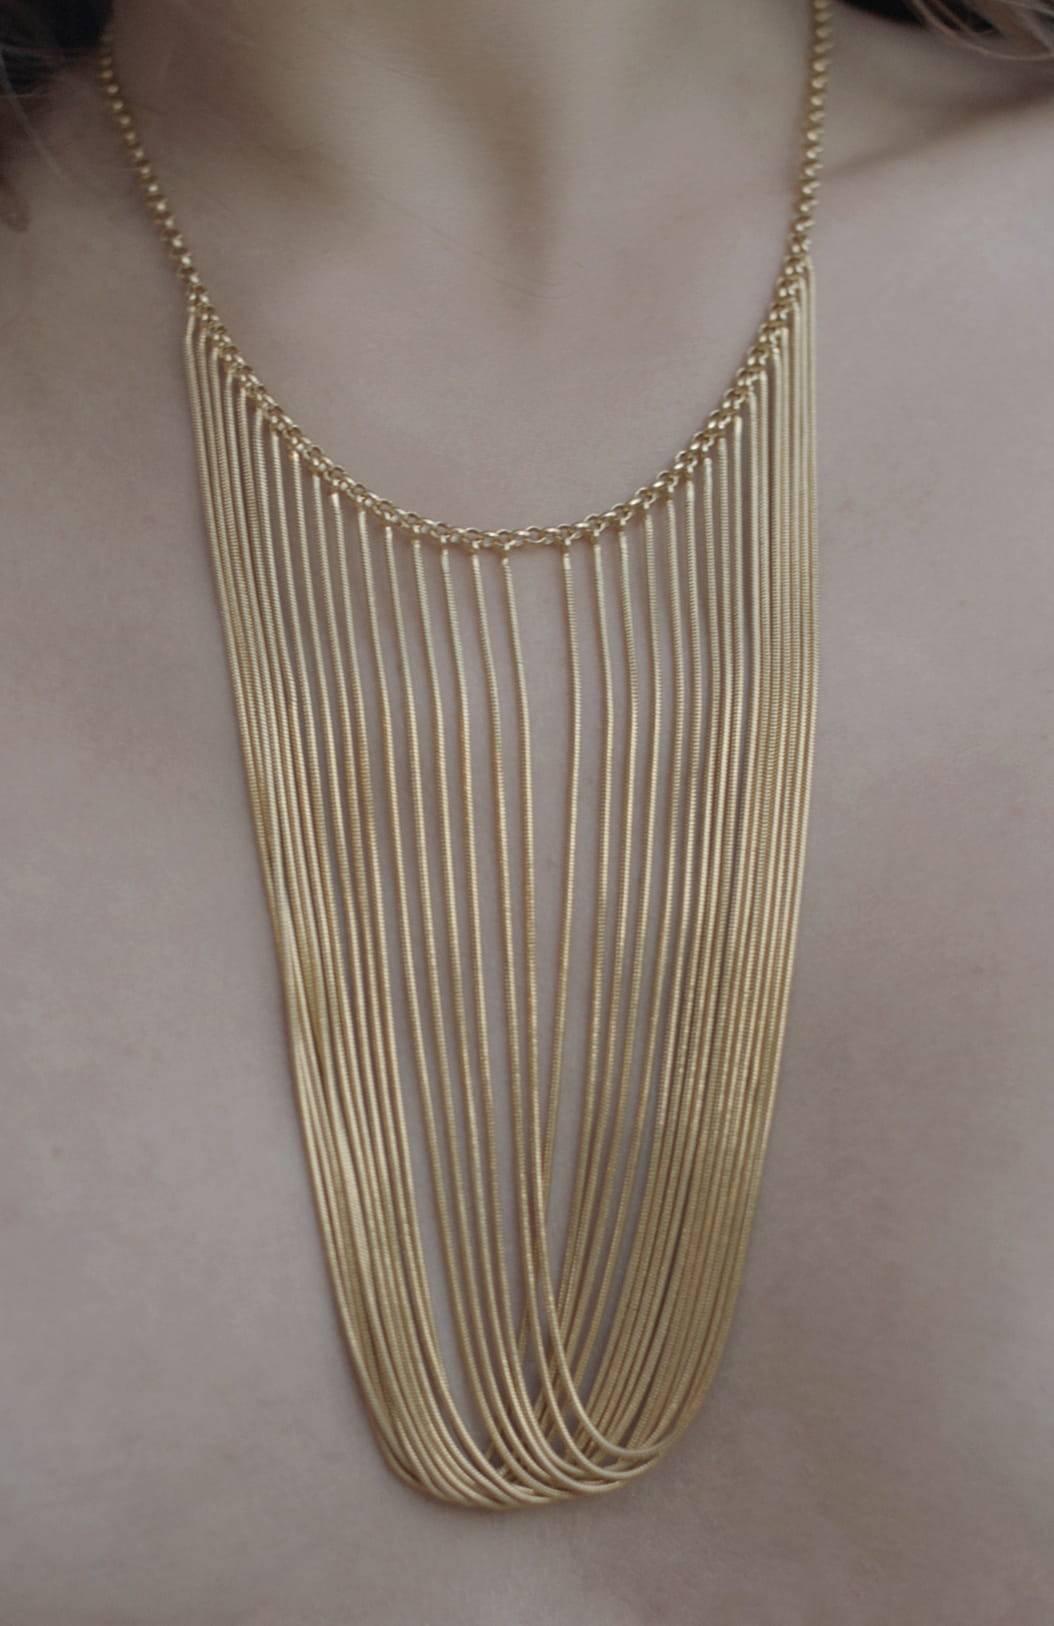 Necklace Statement Multi Snake Chain Gold-Plated Brass Greek Jewelry In New Condition For Sale In Athens, GR